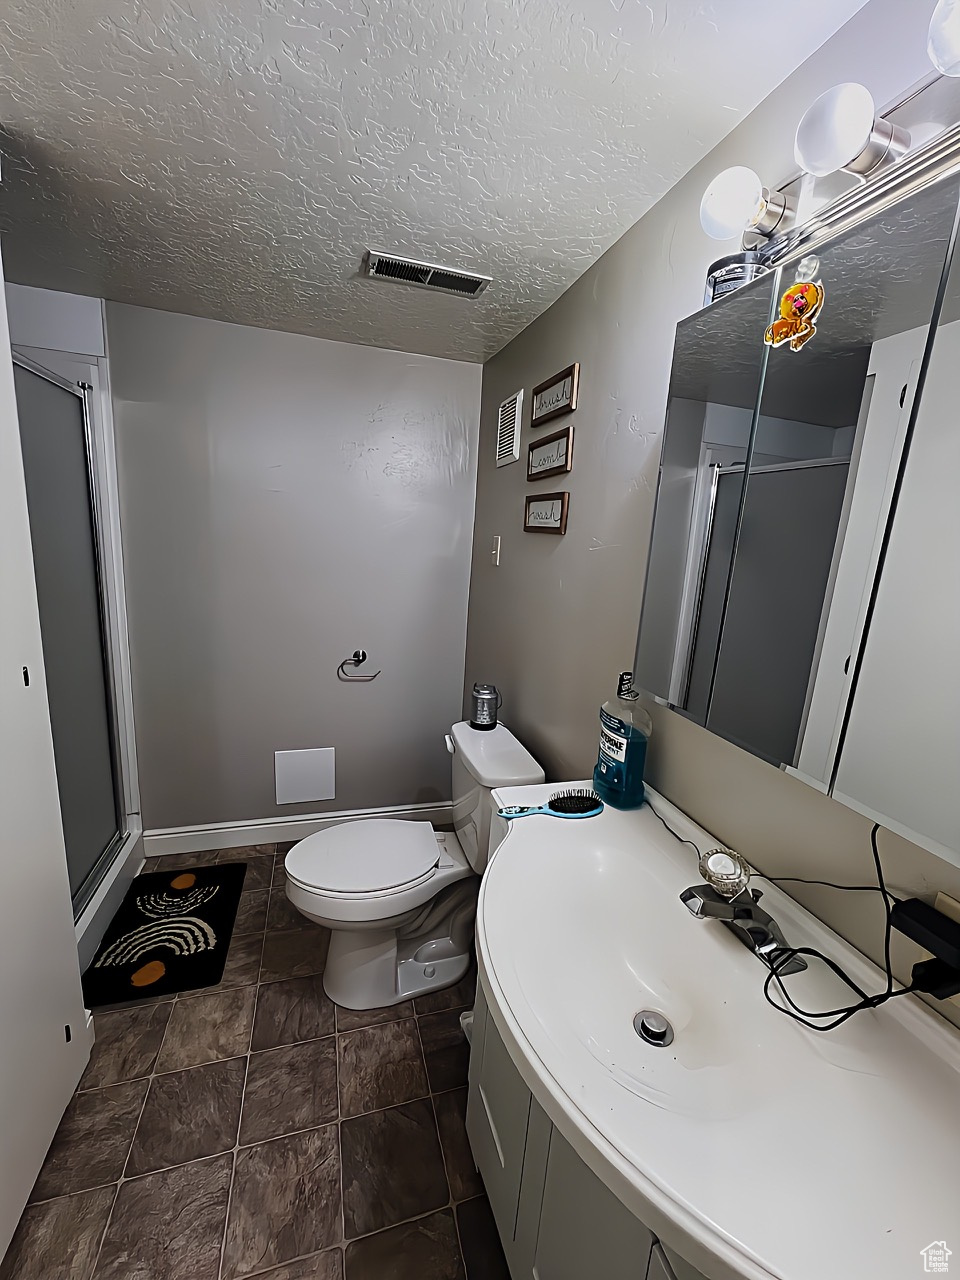 Bathroom featuring tile floors, vanity, a shower with shower door, toilet, and a textured ceiling